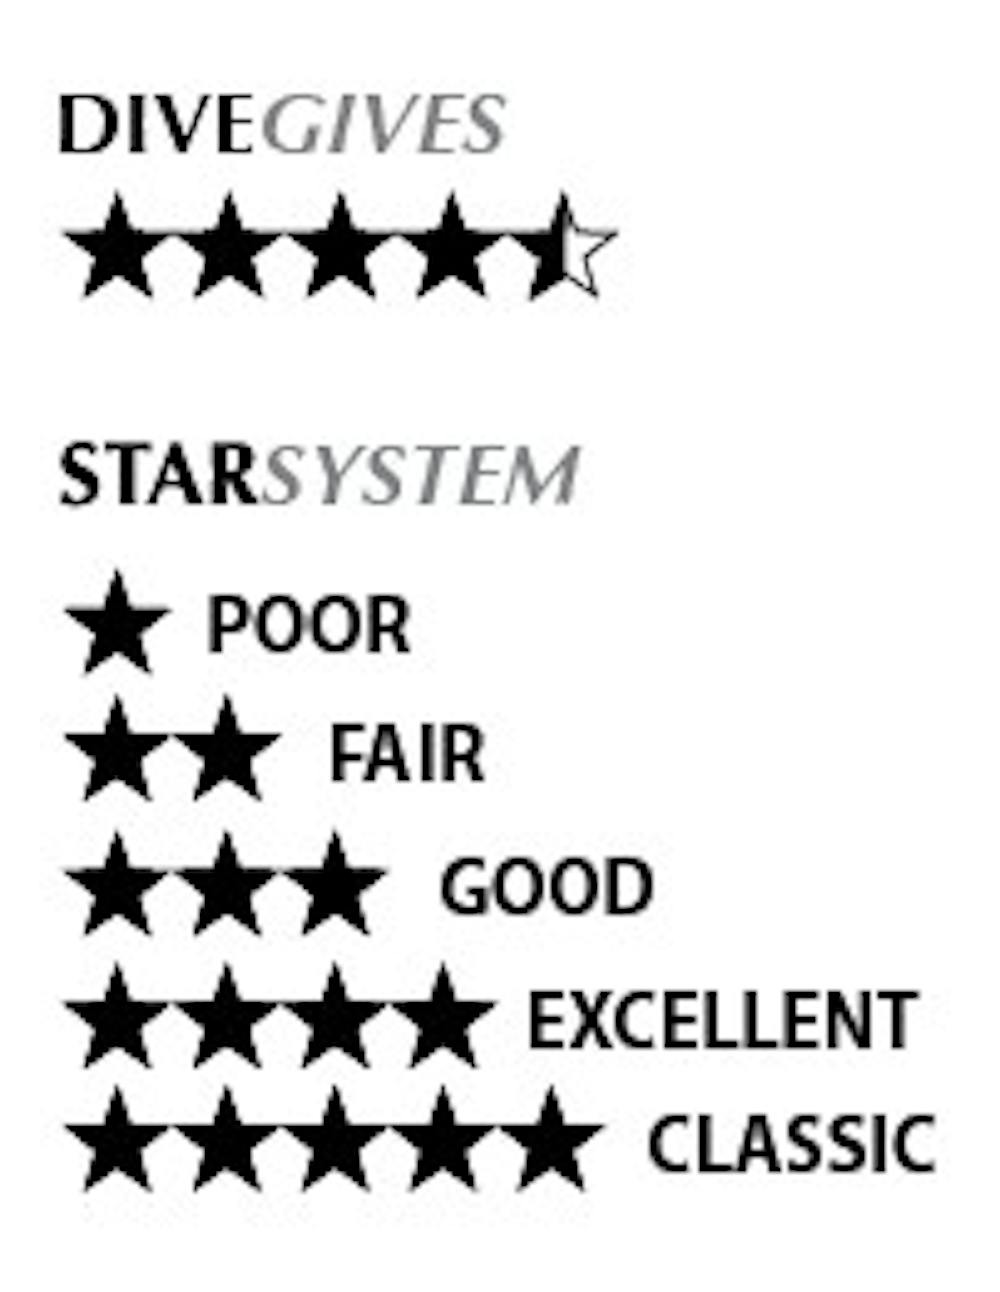 Dive gives 4.5 of 5 stars